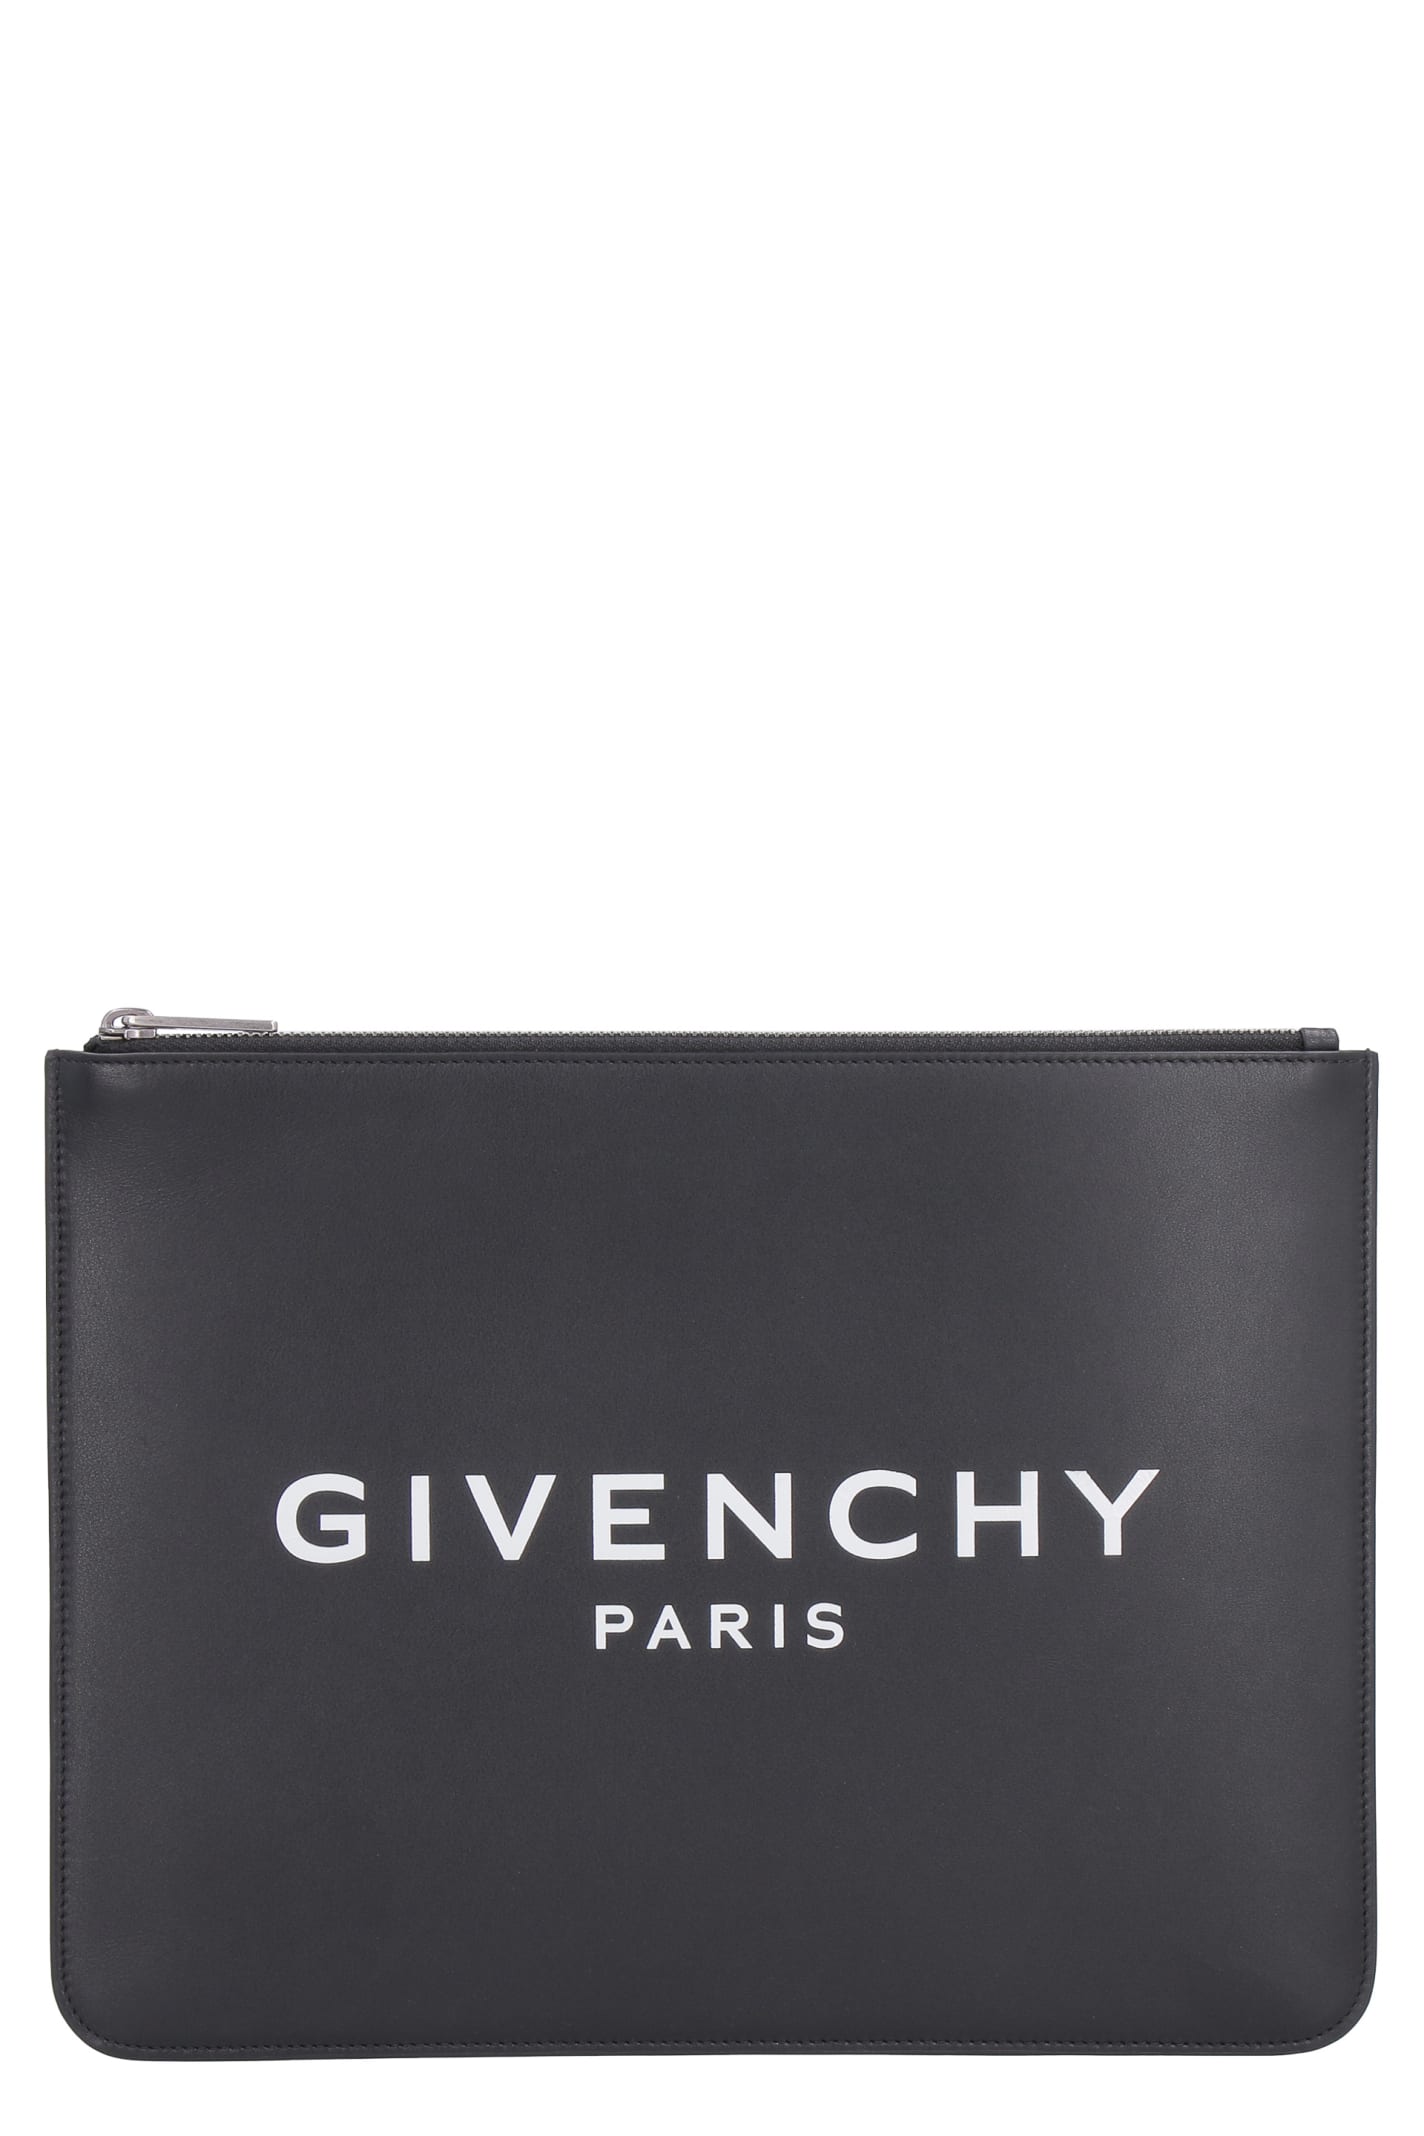 Givenchy Logo Print Leather Flat Pouch